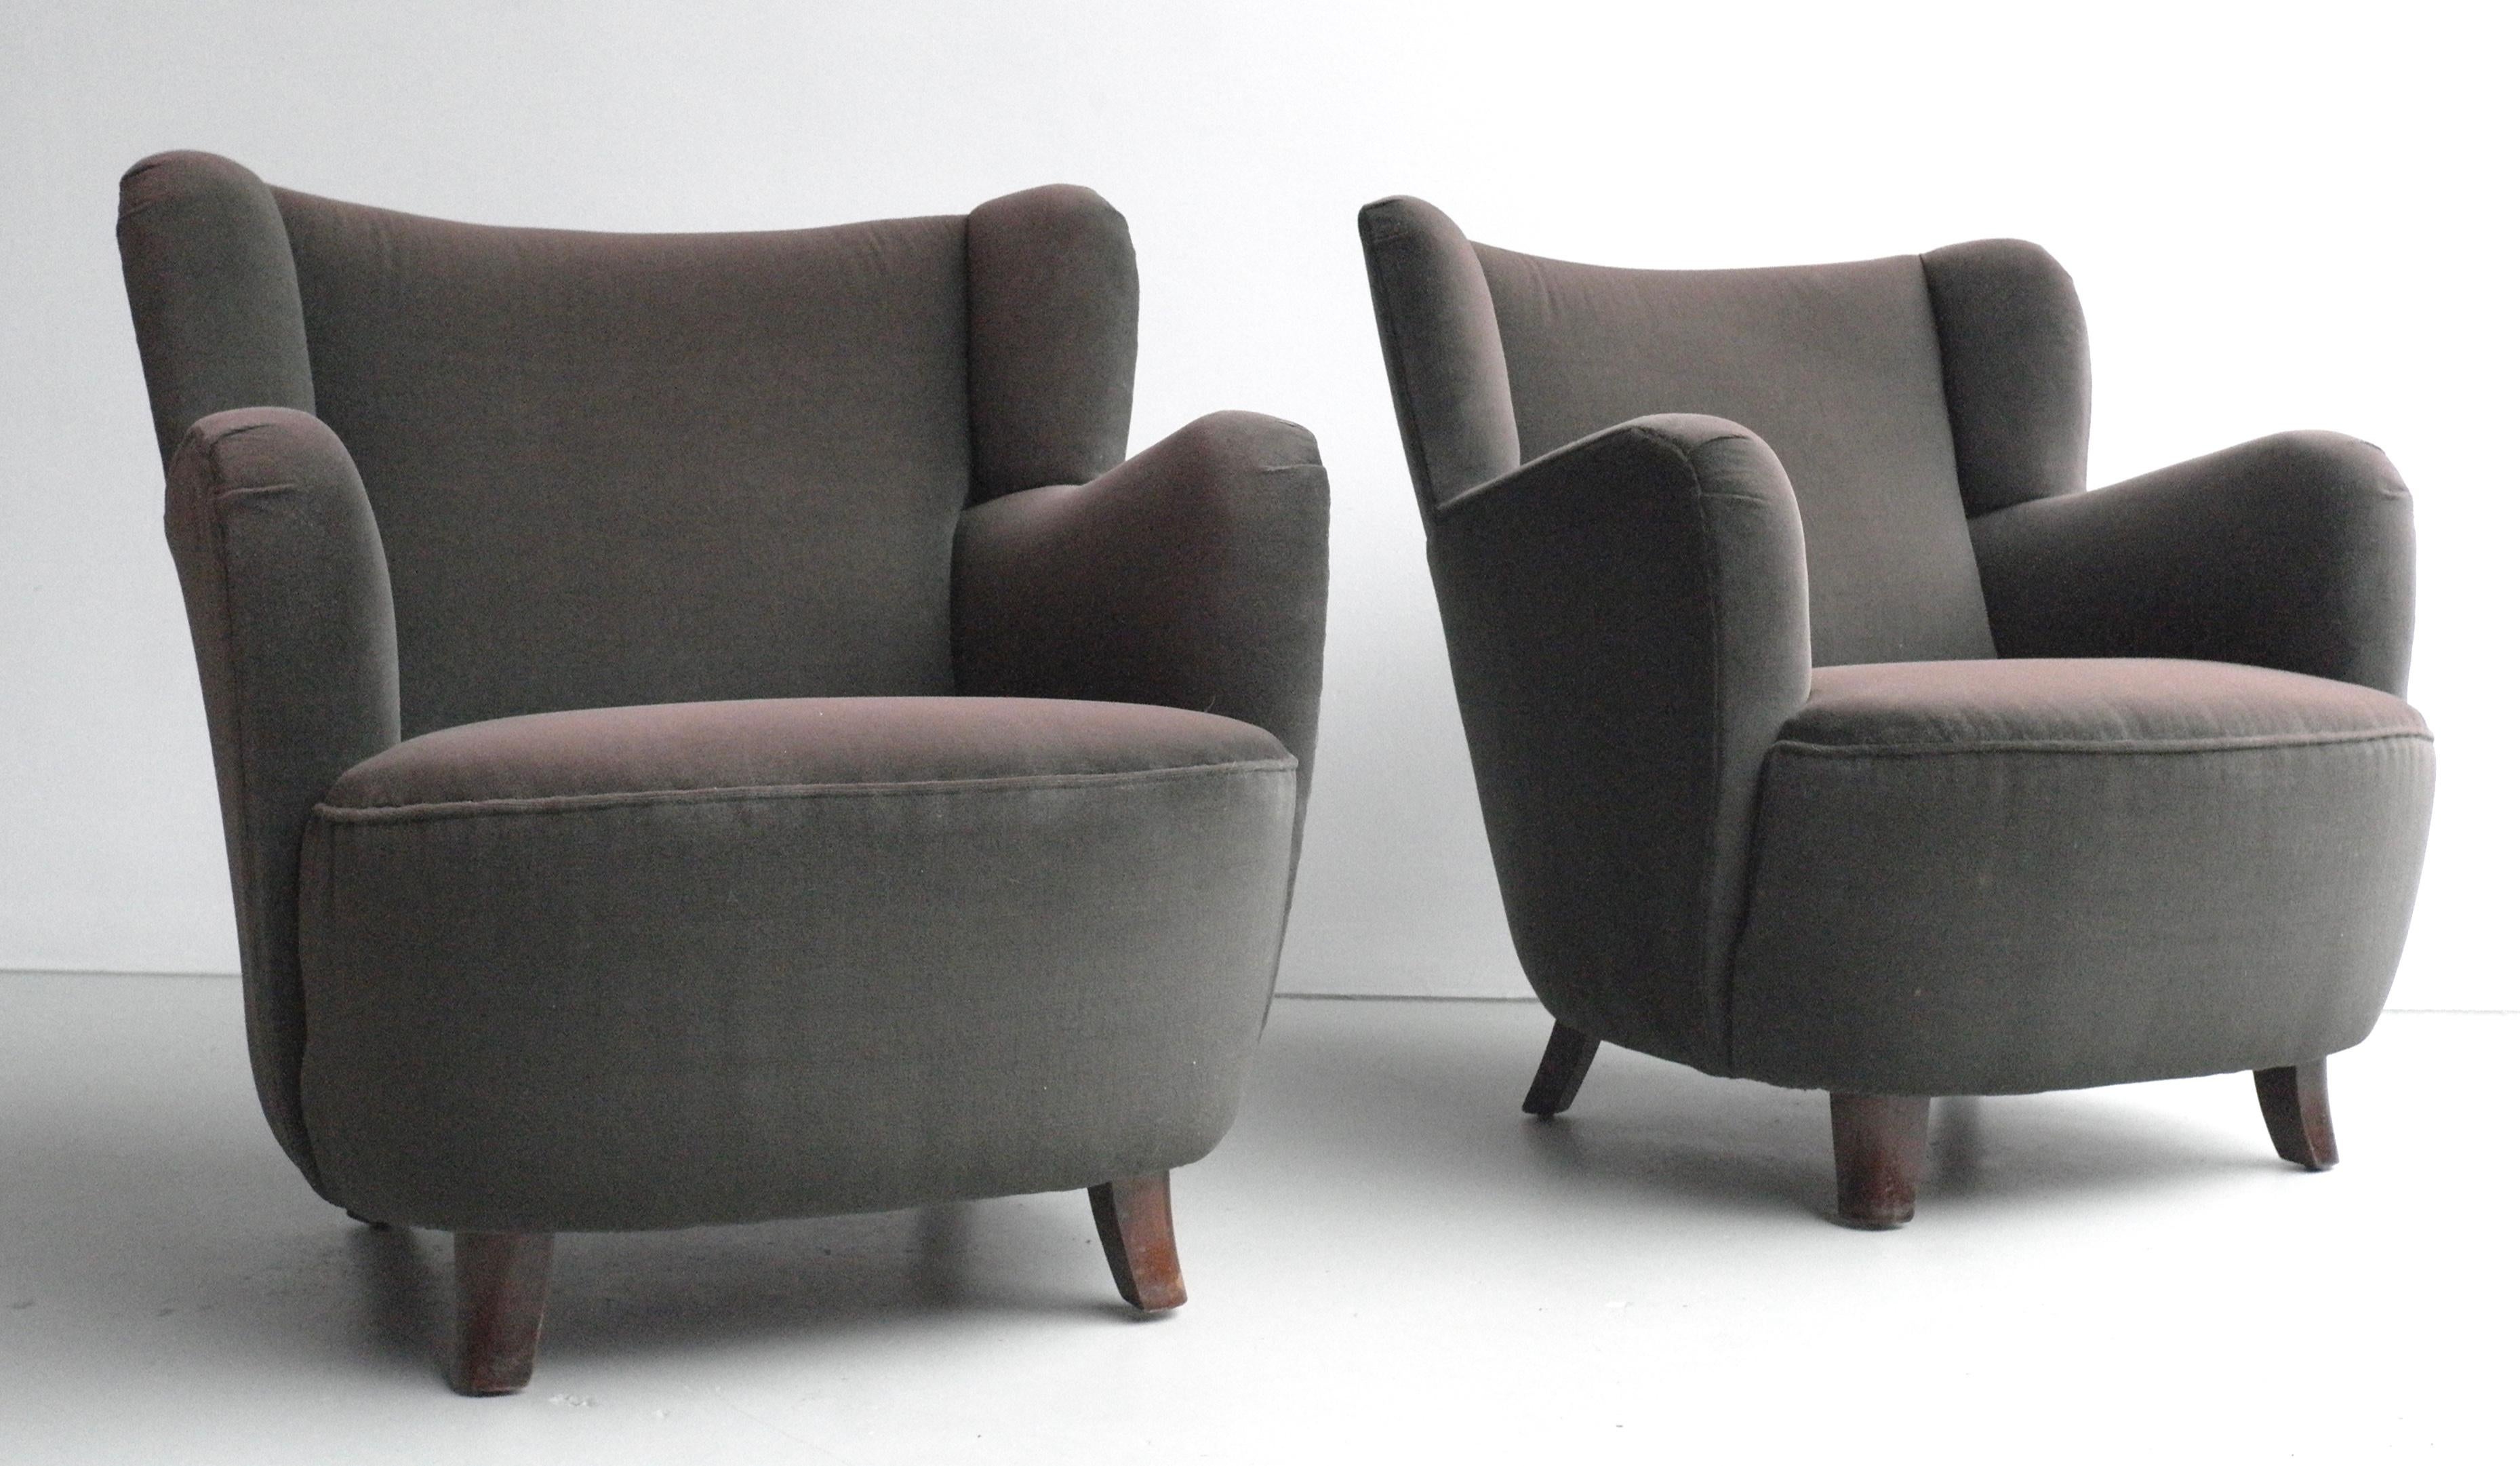 Pair of Mid-Century Modern Danish Lounge Chairs in Brown Eggplant Glow Velvet For Sale 2